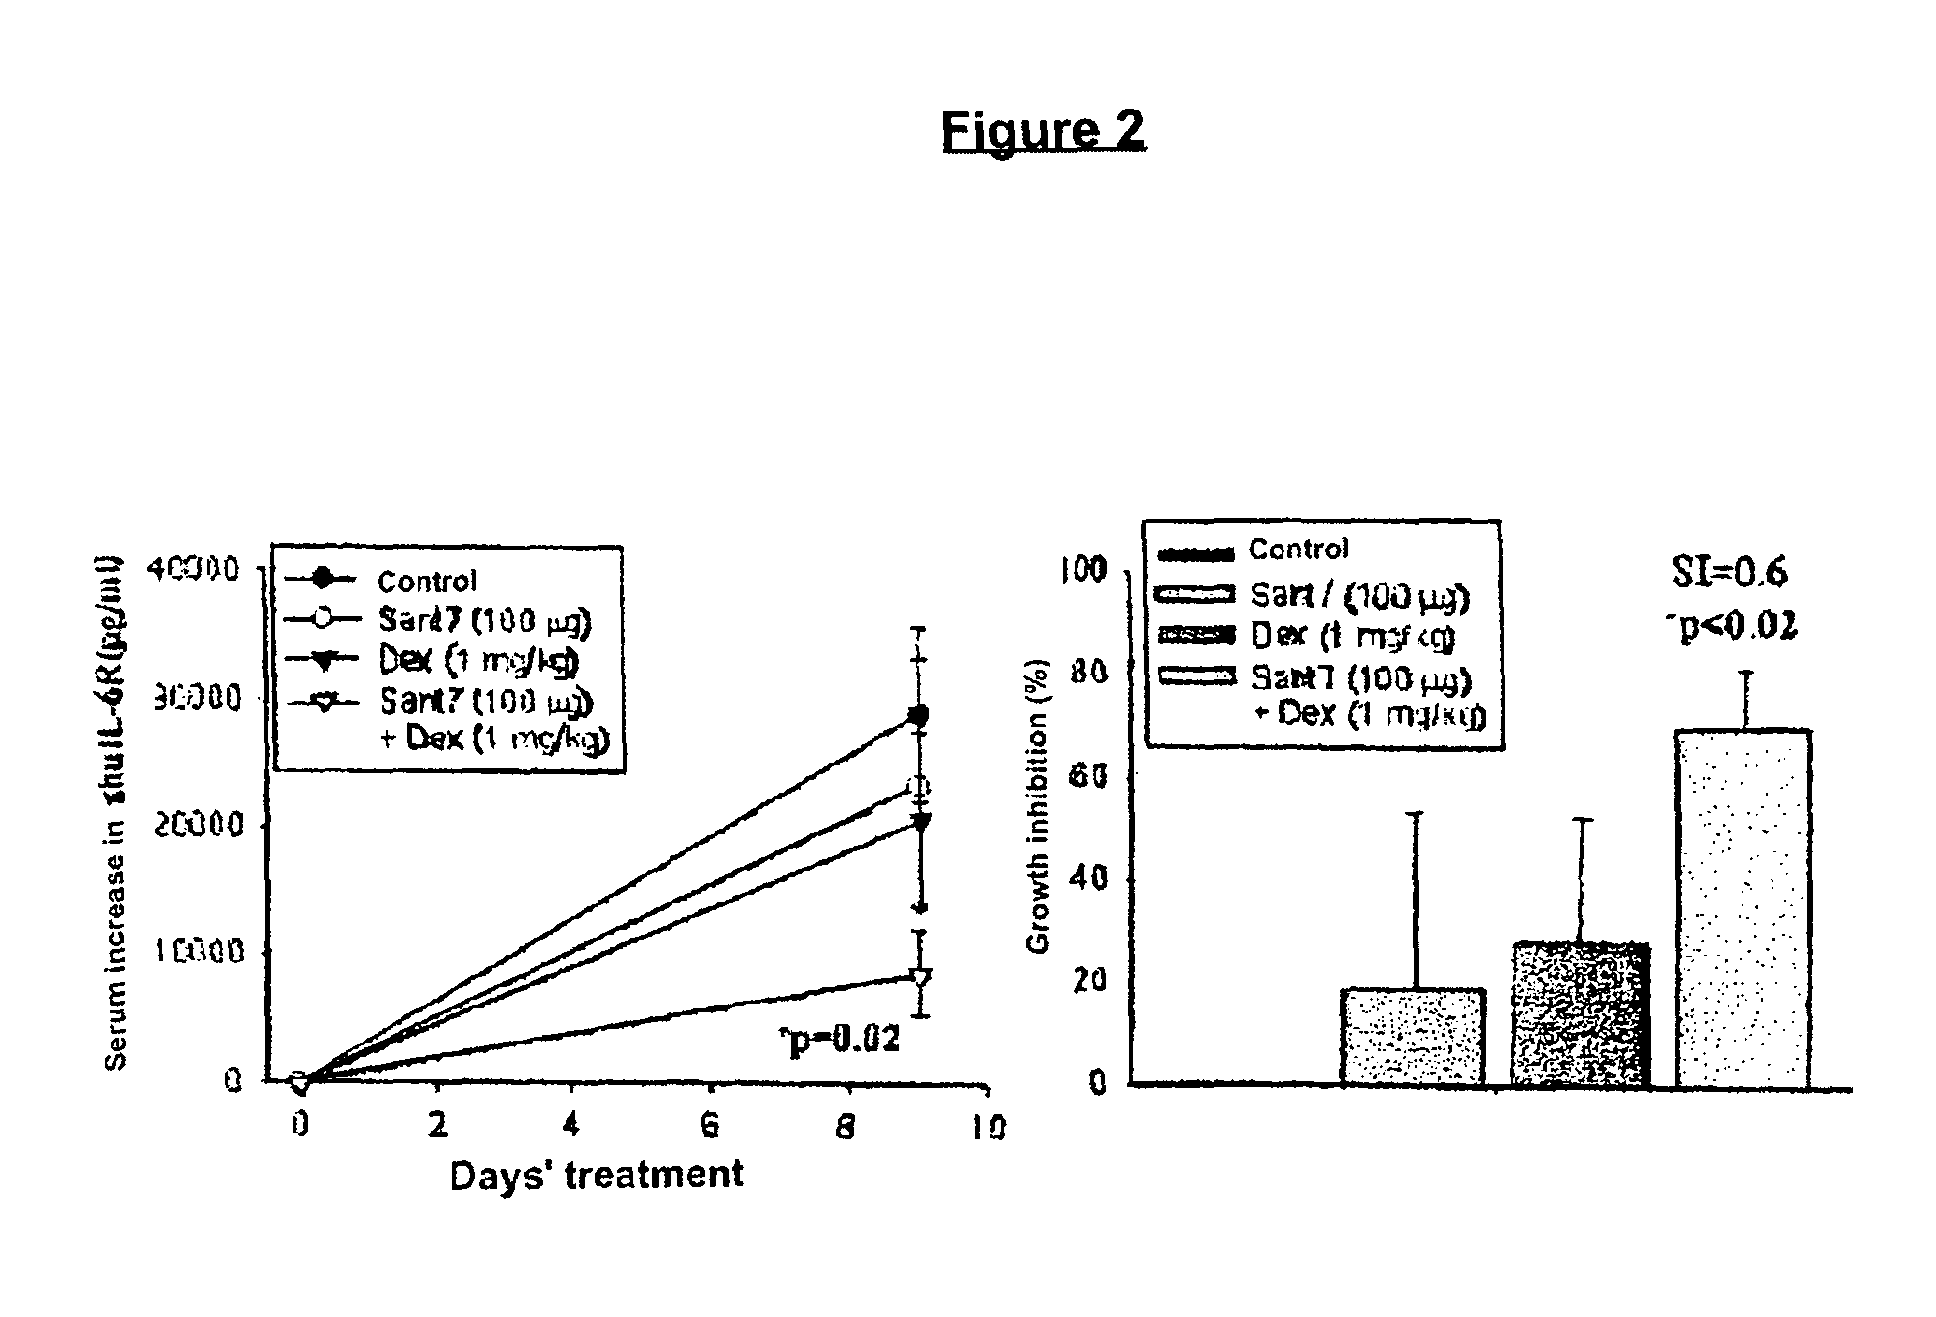 Combination of interleukin-6 antagonists and antiproliferative drugs